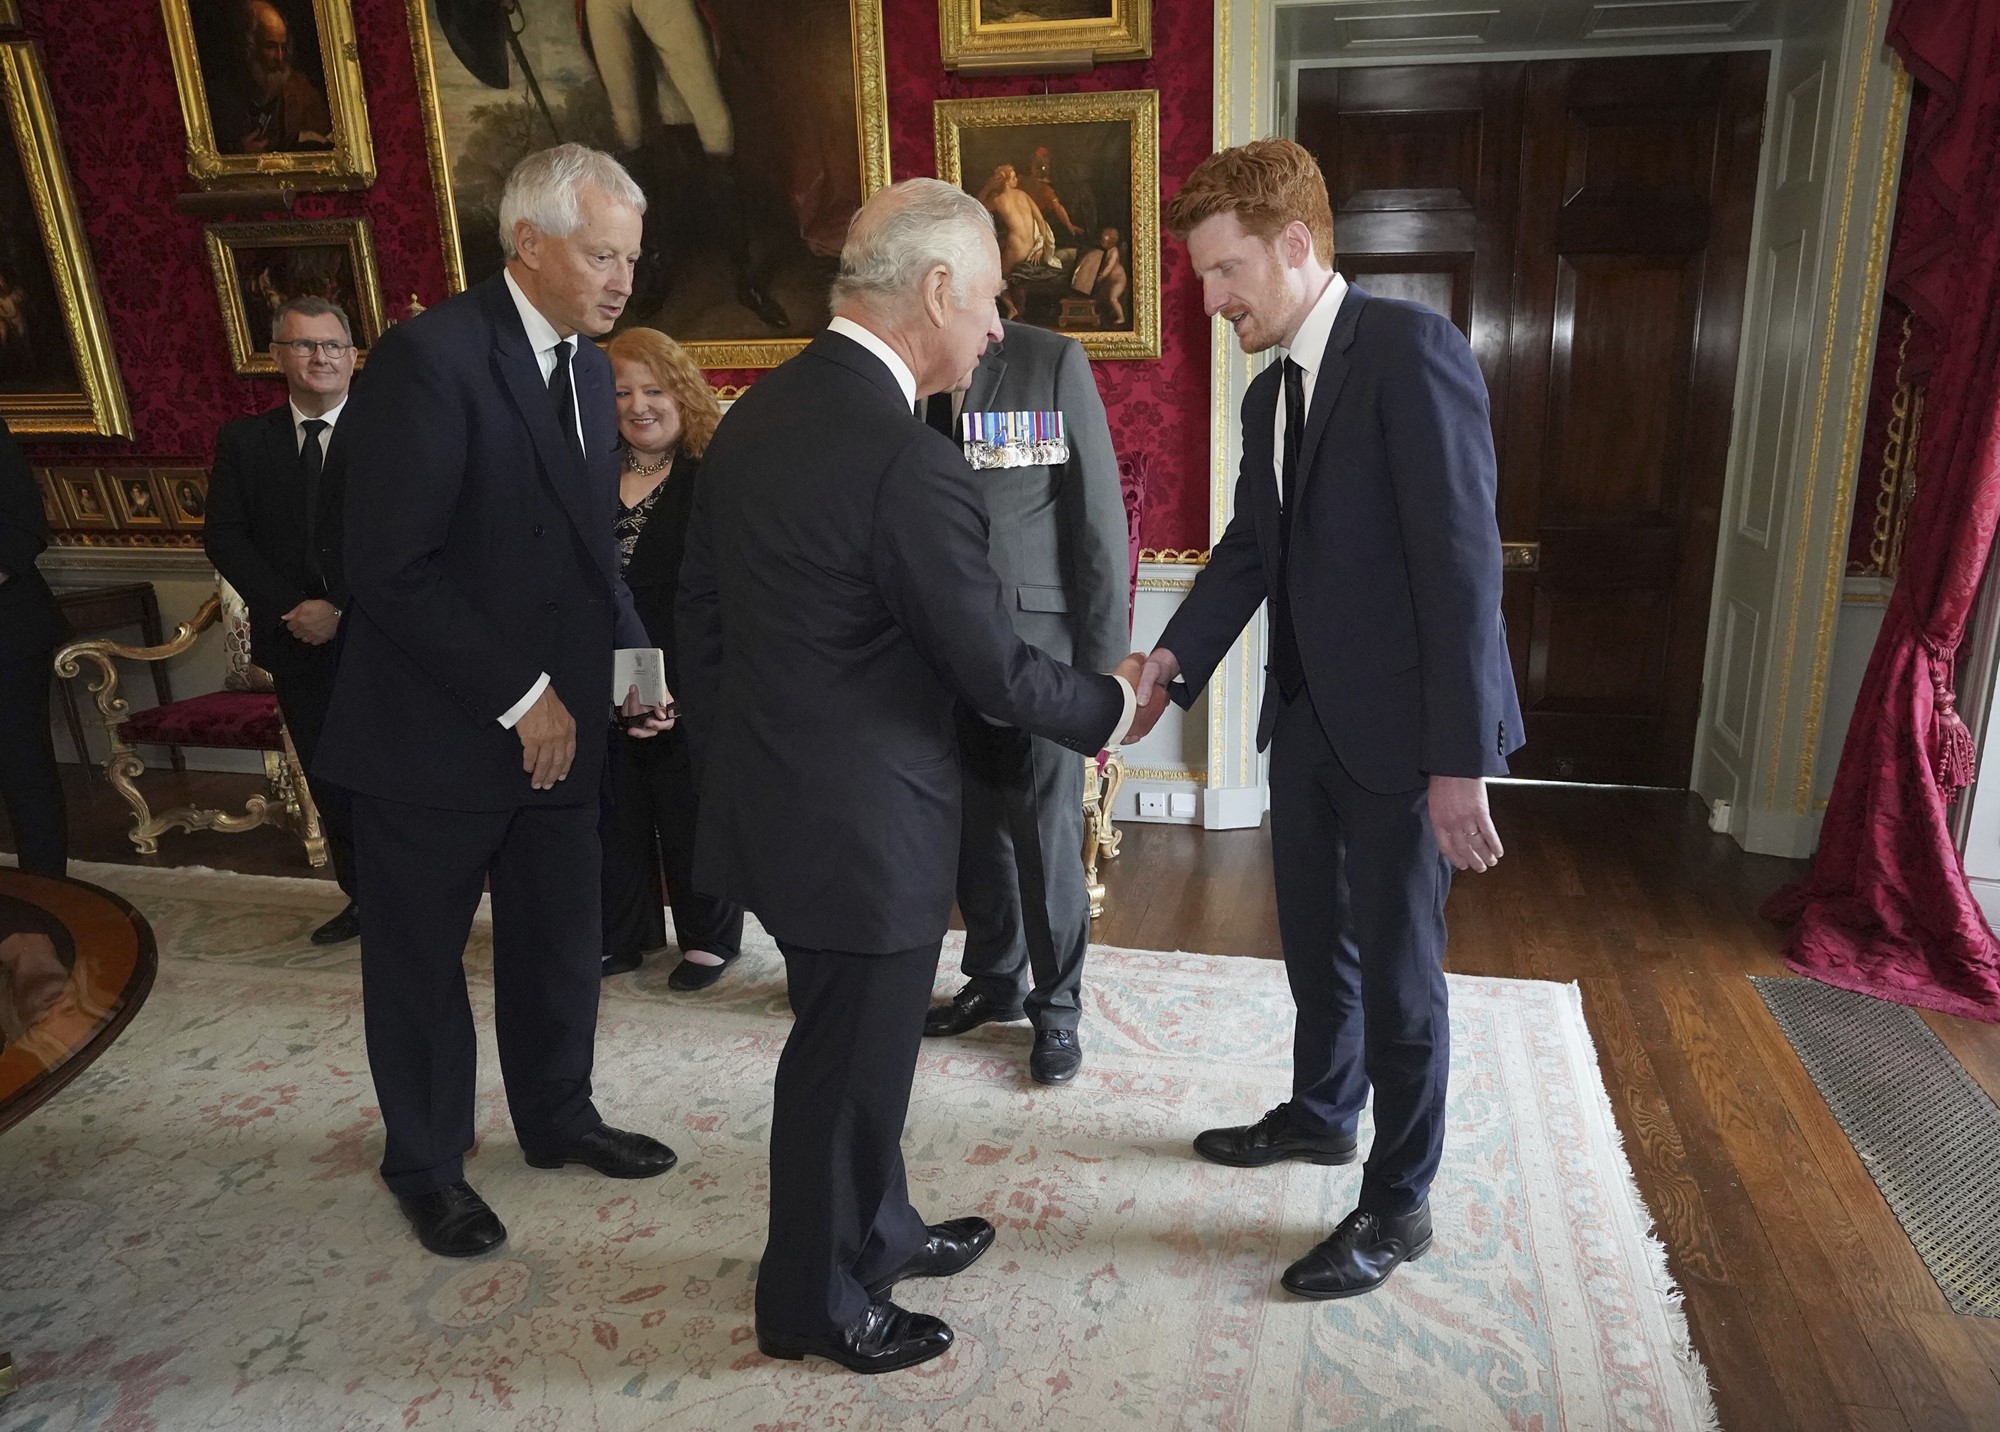 Britain's King Charles III meets with SDLP MLA Matthew O'Toole at Hillsborough Castle, Belfast, Tuesday Sept. 13, 2022.